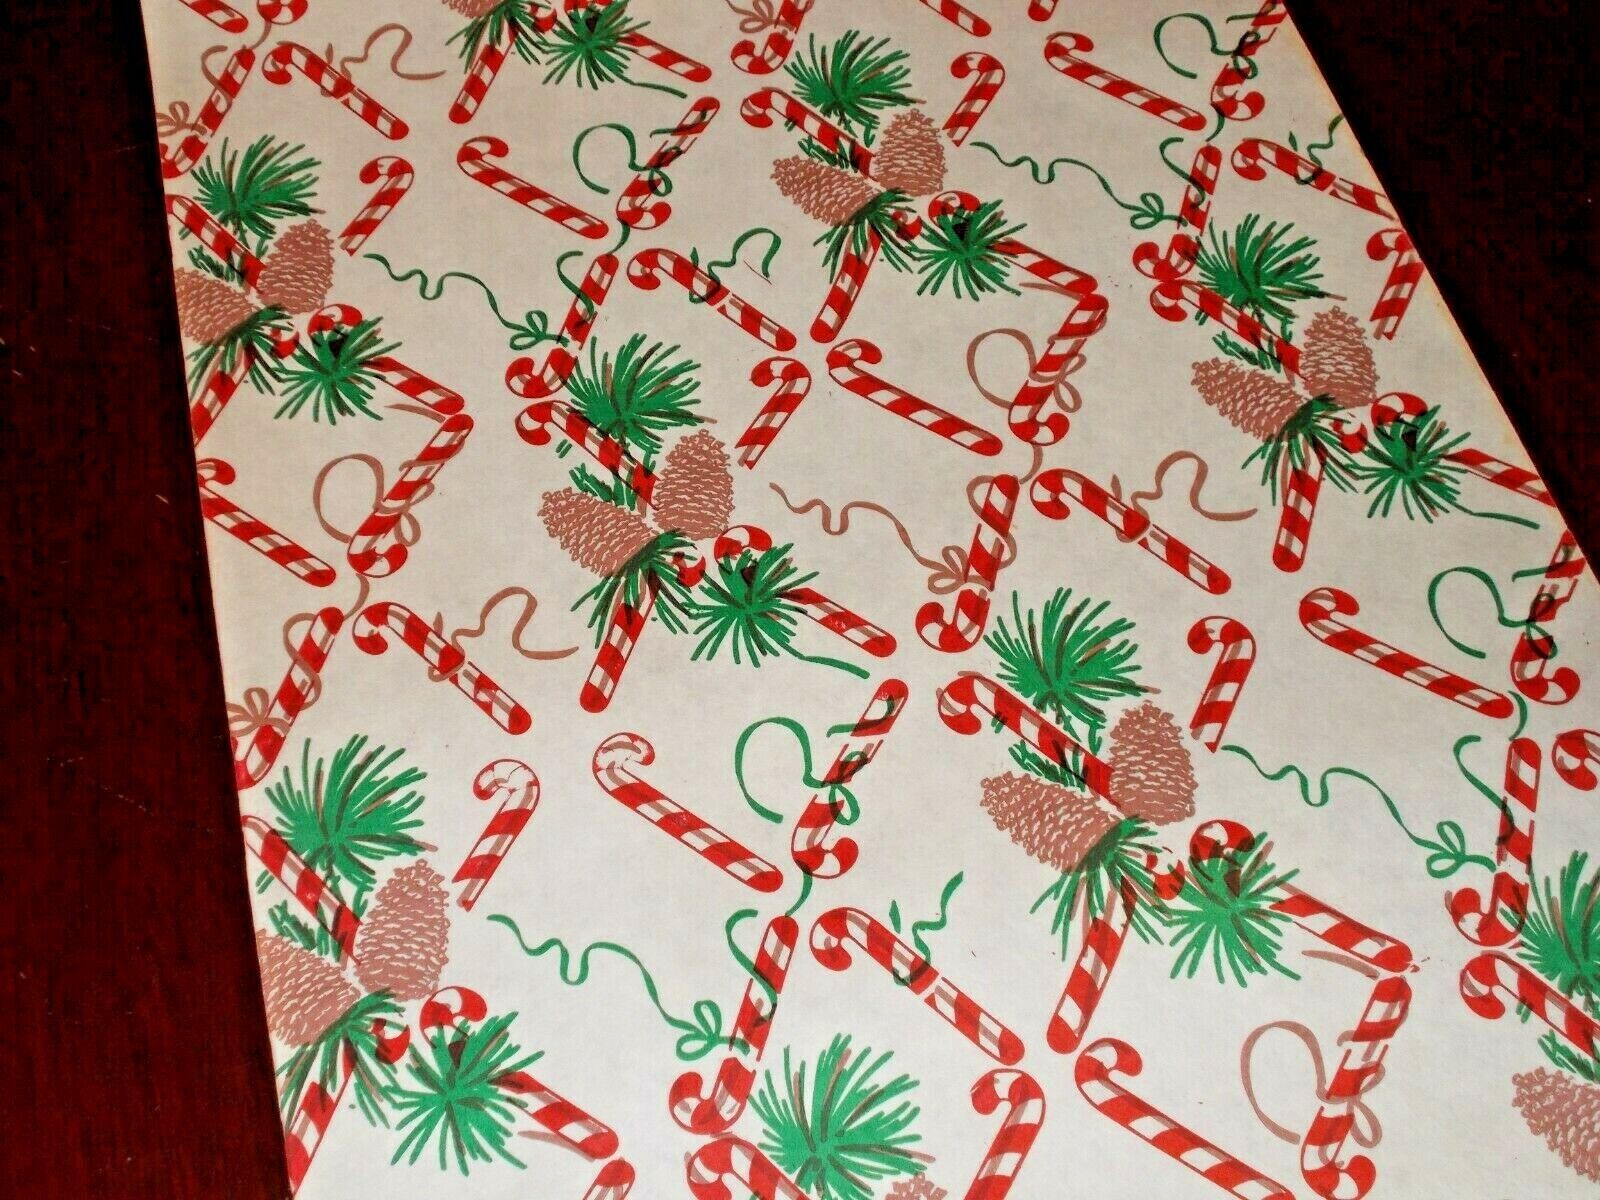 VTG CHRISTMAS 1940 WW2 WRAPPING PAPER 2 YARDS PINECONES CANDY CANES 